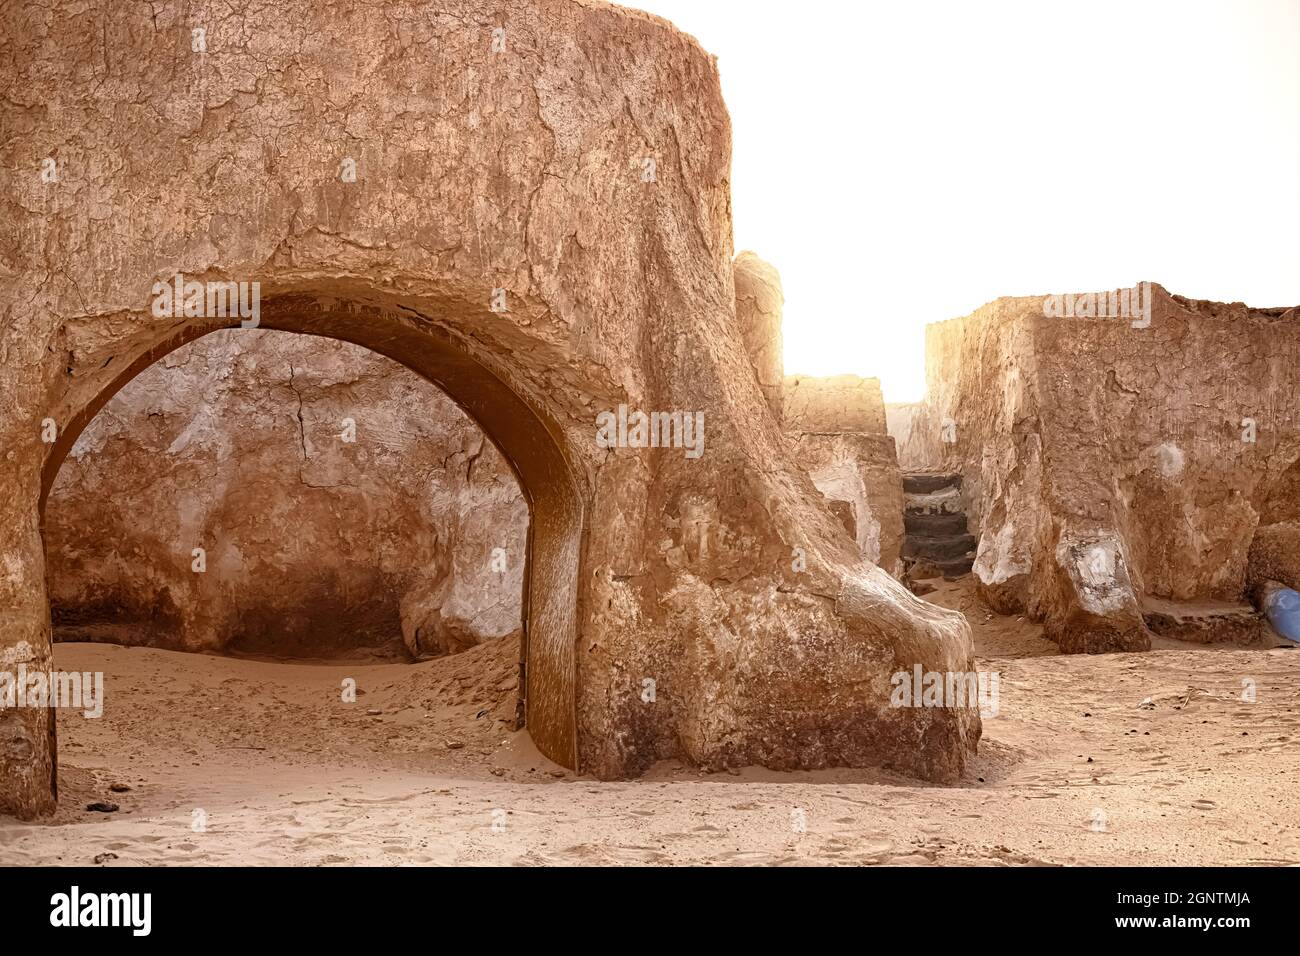 Abandoned set for the filming of Star Wars movie in the Sahara Desert against the backdrop of sand dunes. Stock Photo